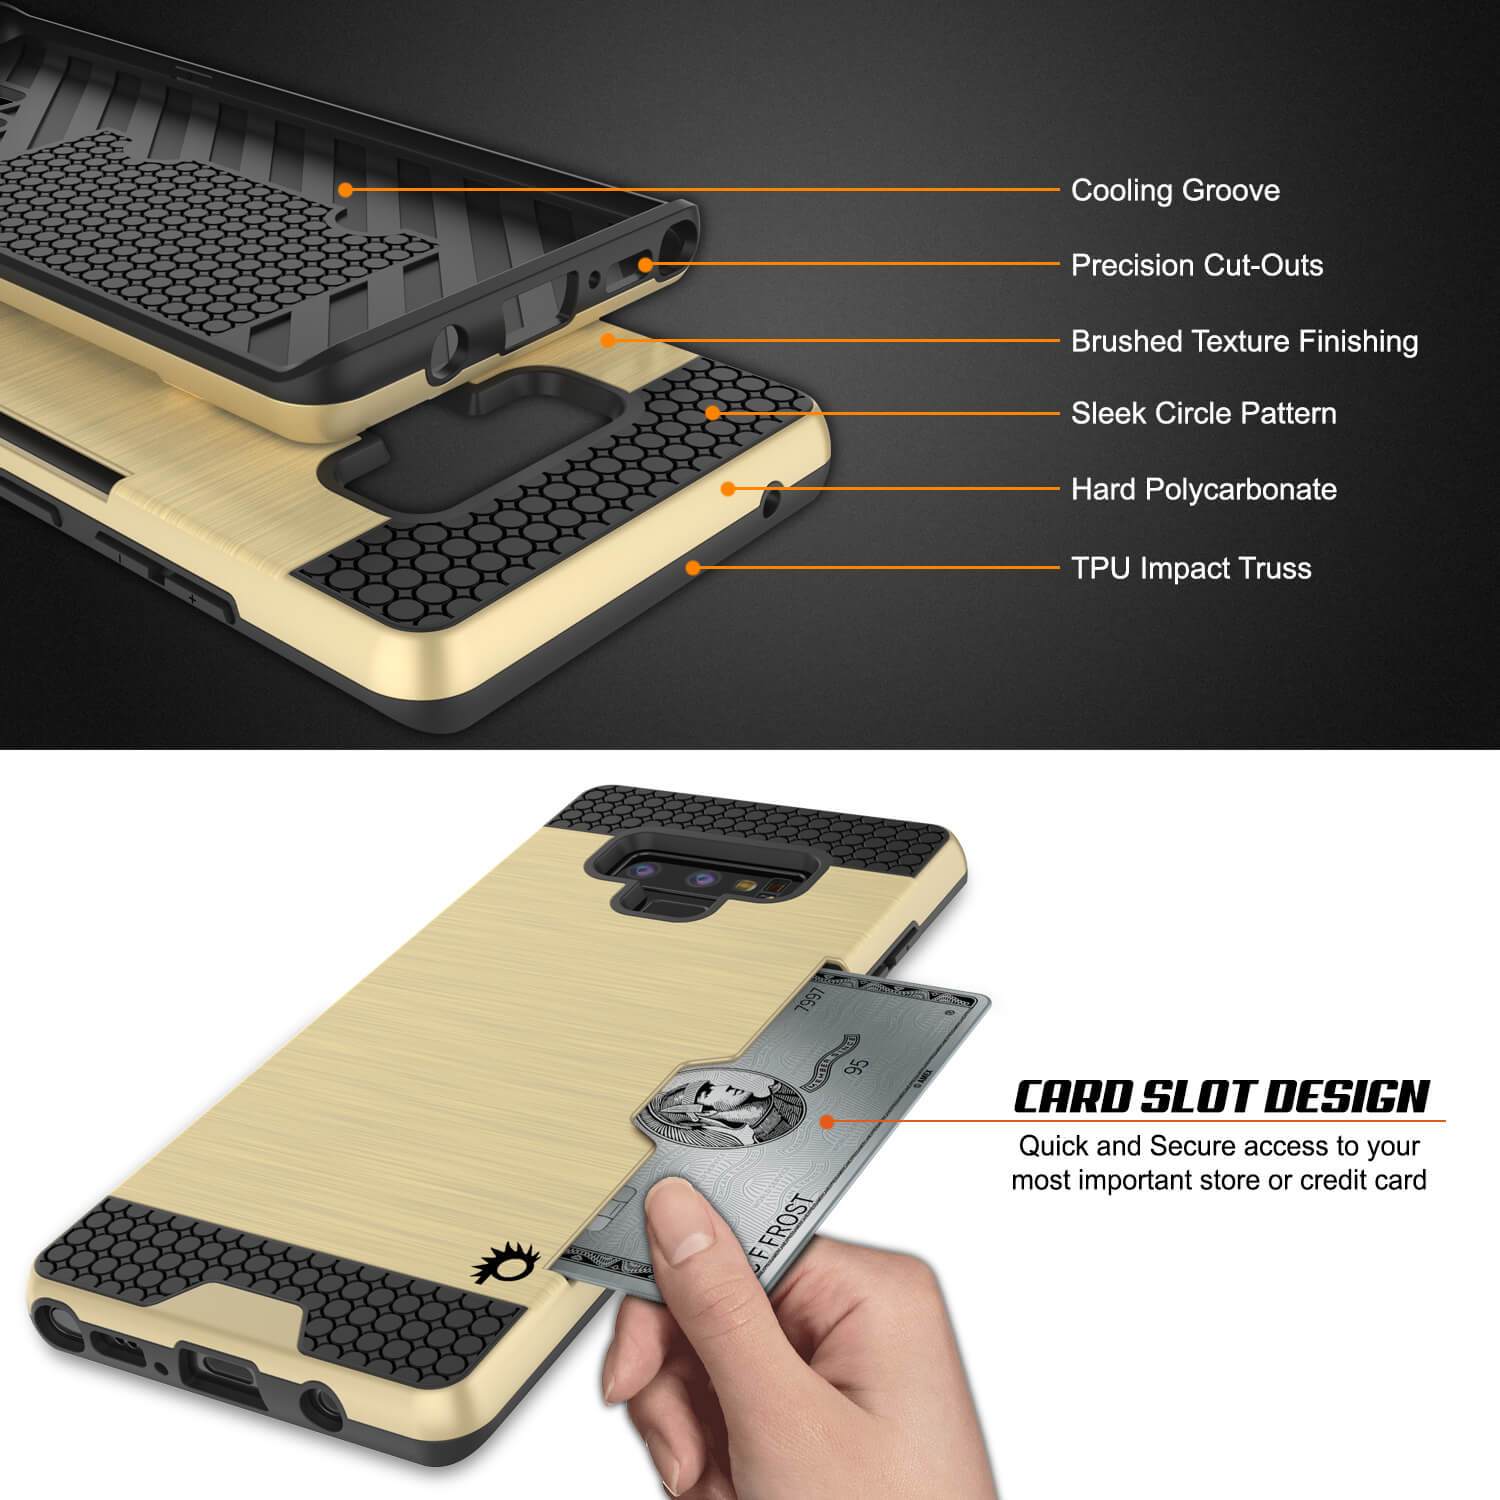 Galaxy Note 9 Case, Punkcase [SLOT Series] Slim Fit Cover [Gold]